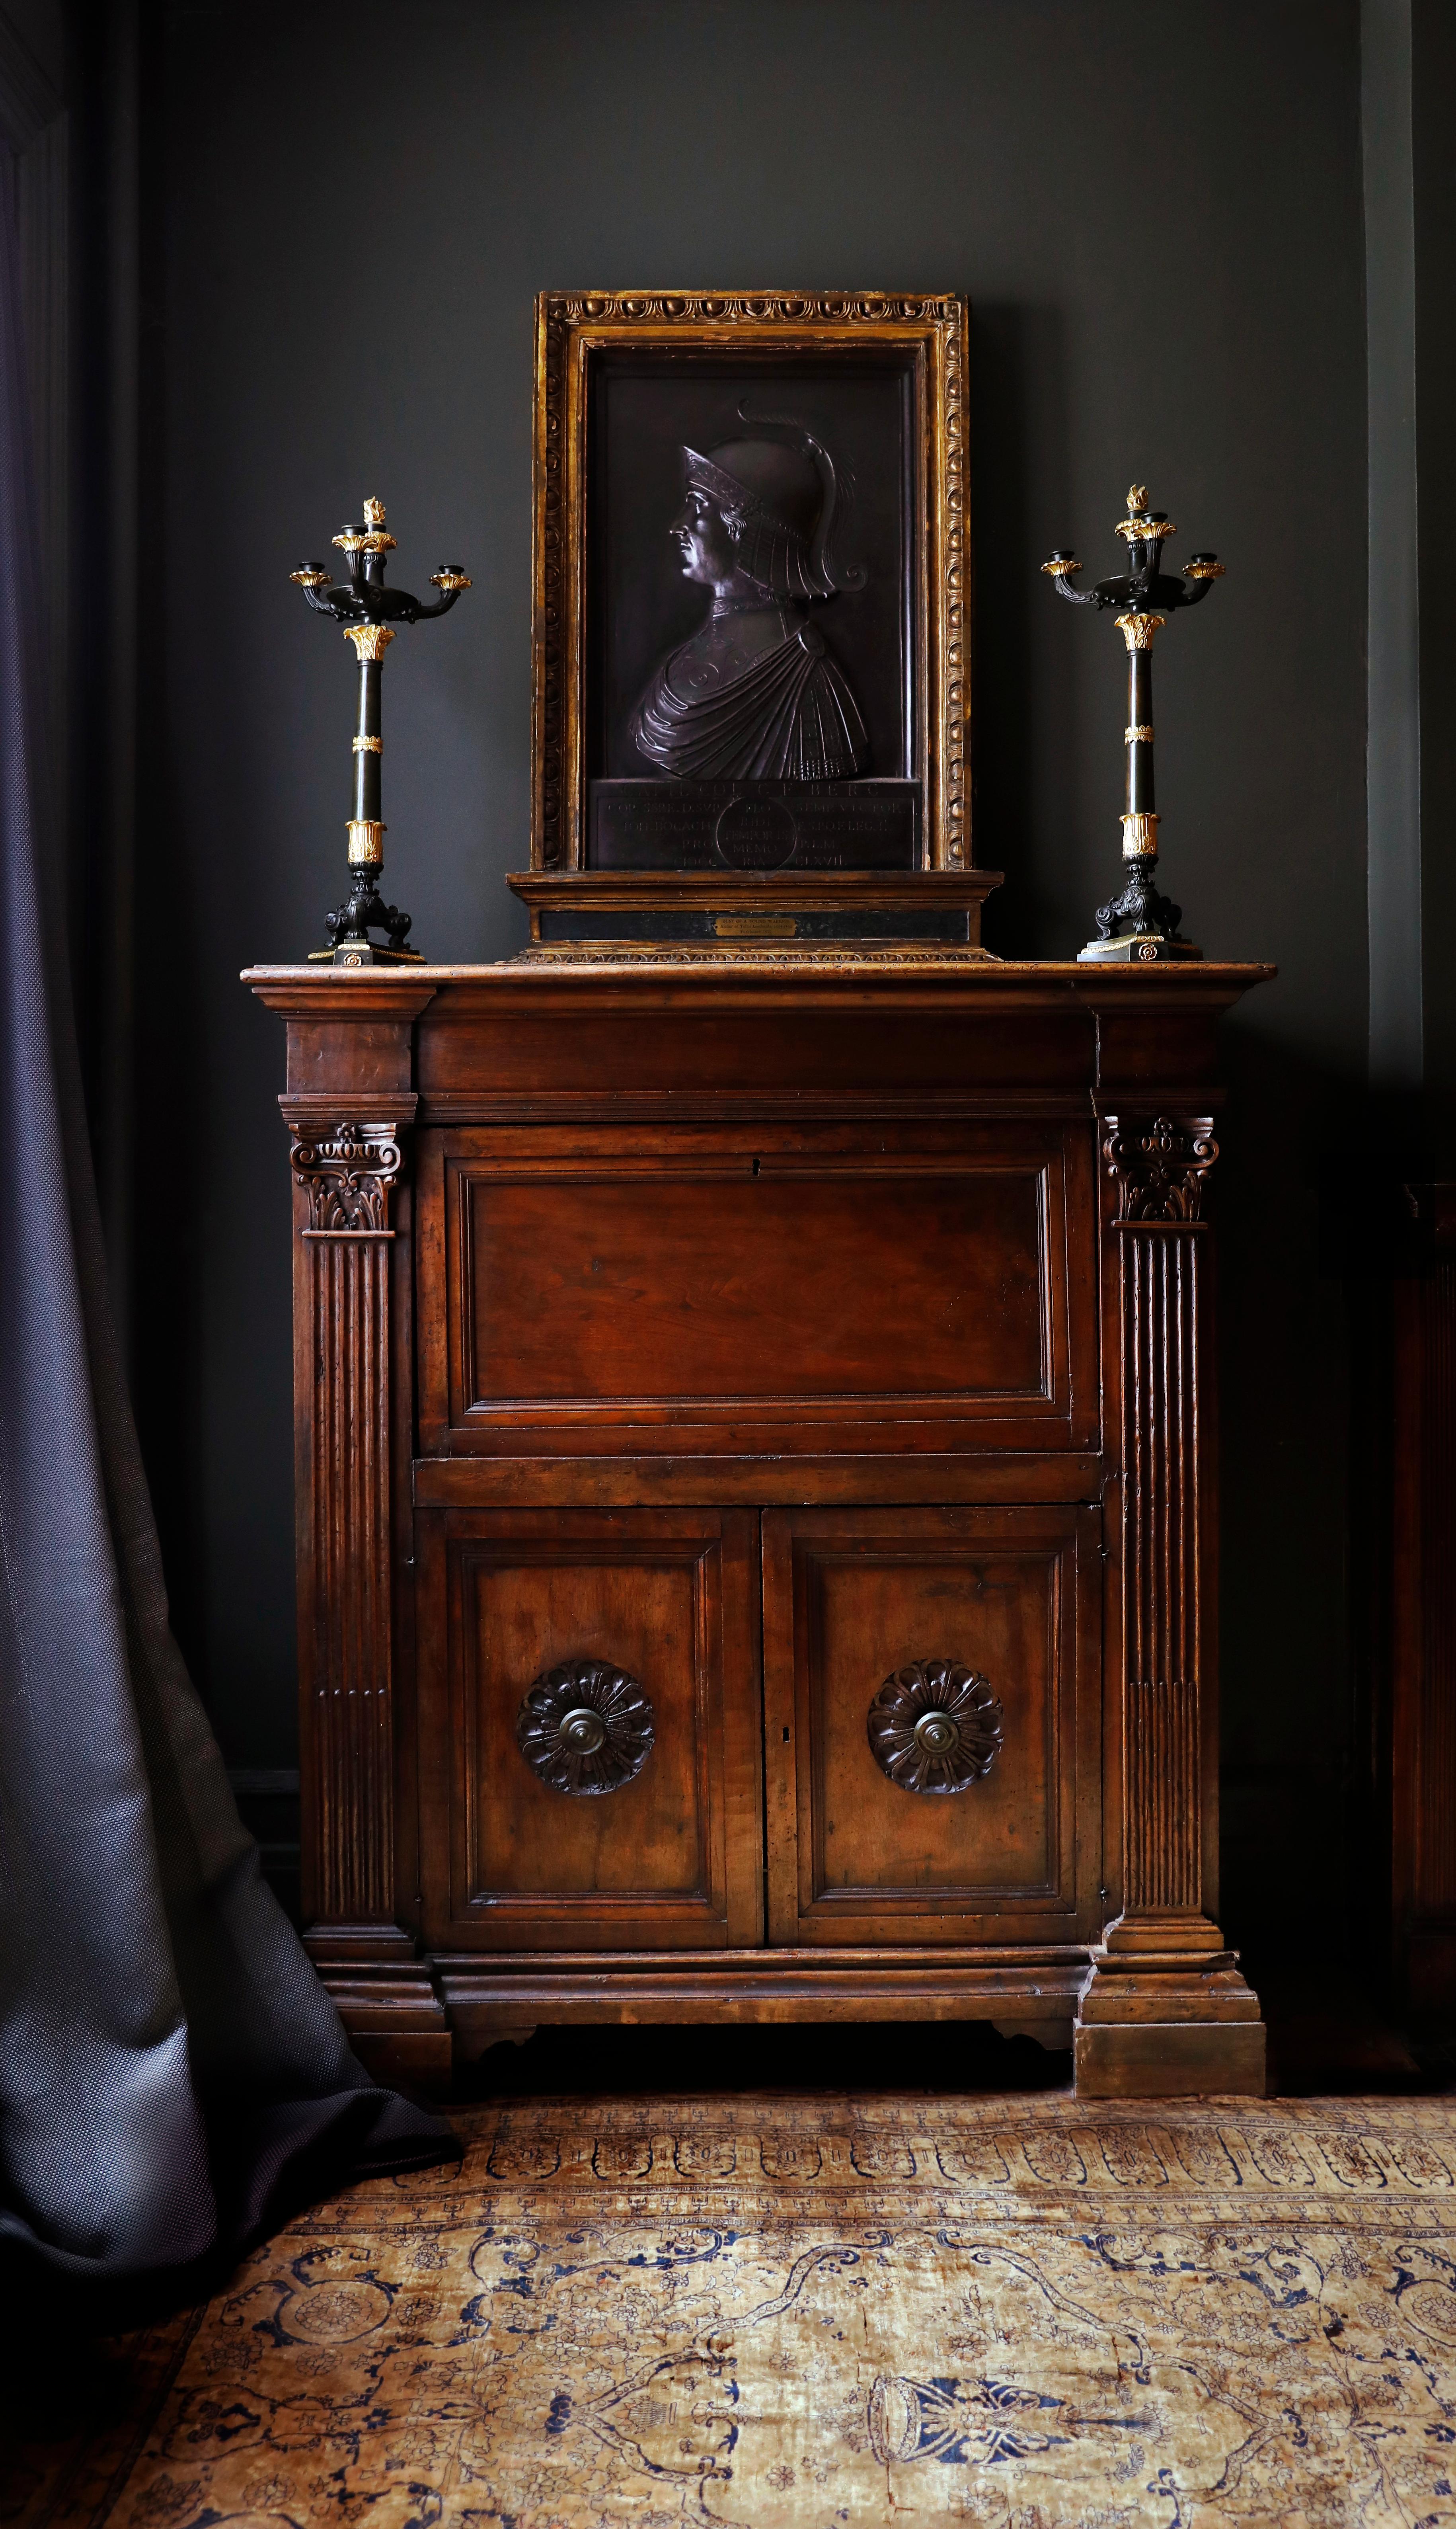 An extremely rare form of Renaissance furniture, this writing desk is likely from Florence and would have originated from the palazzo study room of a noble family.  The study rooms, also called 